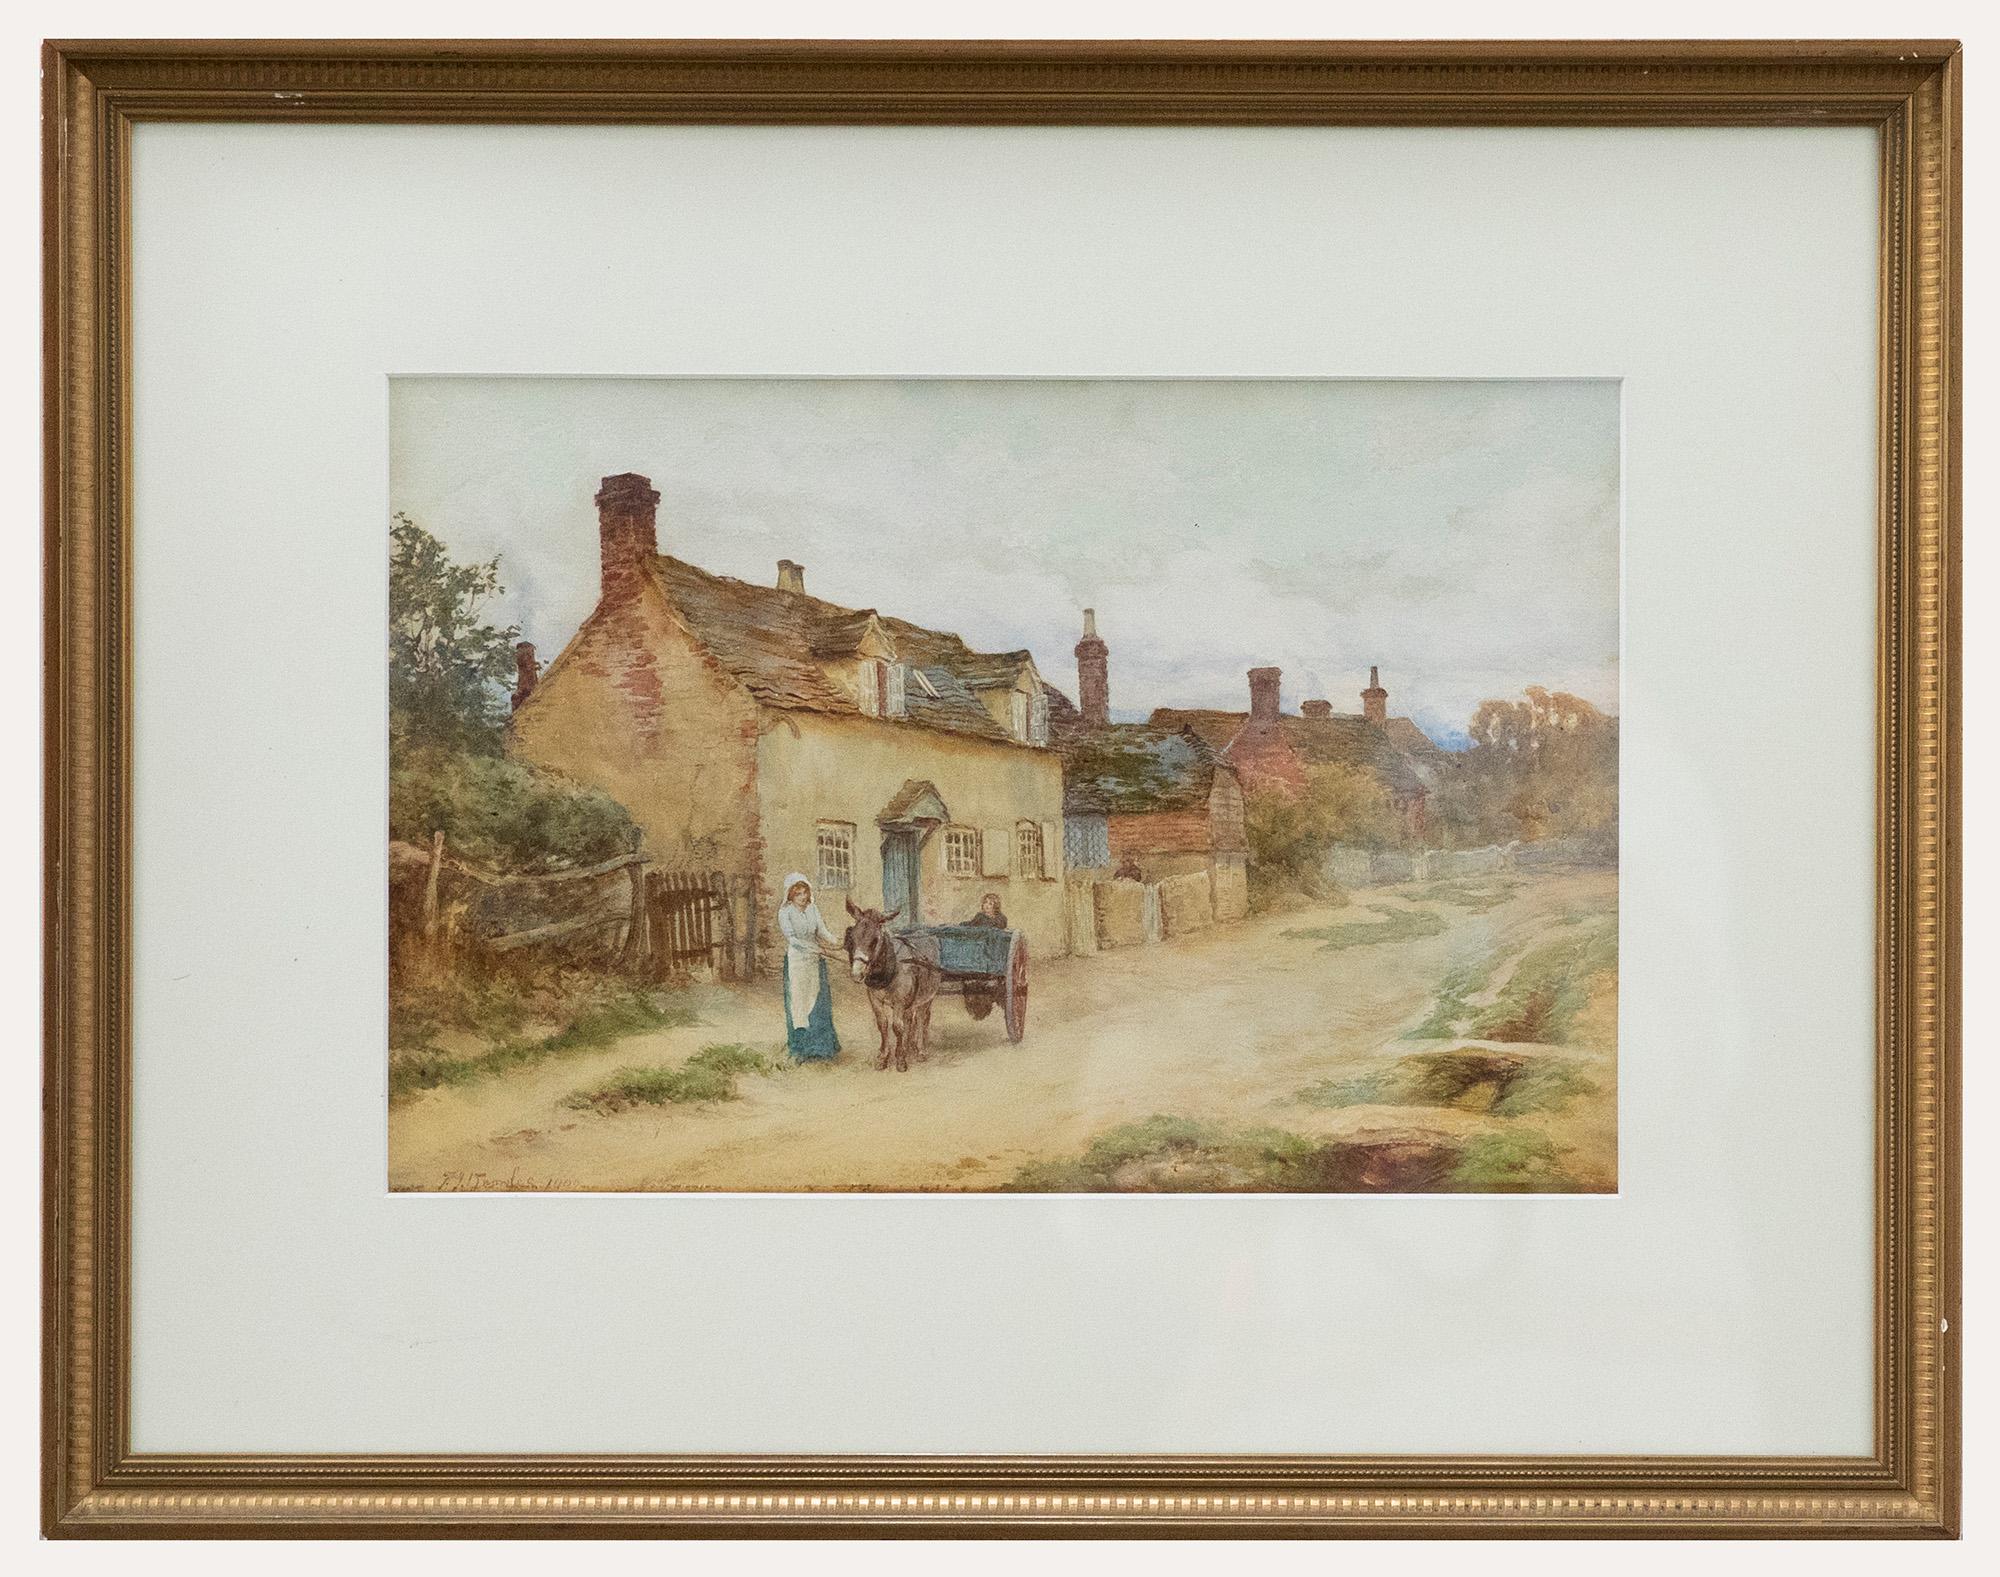 Frederick J. Knowles Landscape Art - F. J. Knowles  - 1900 Watercolour, The Donkey Cart